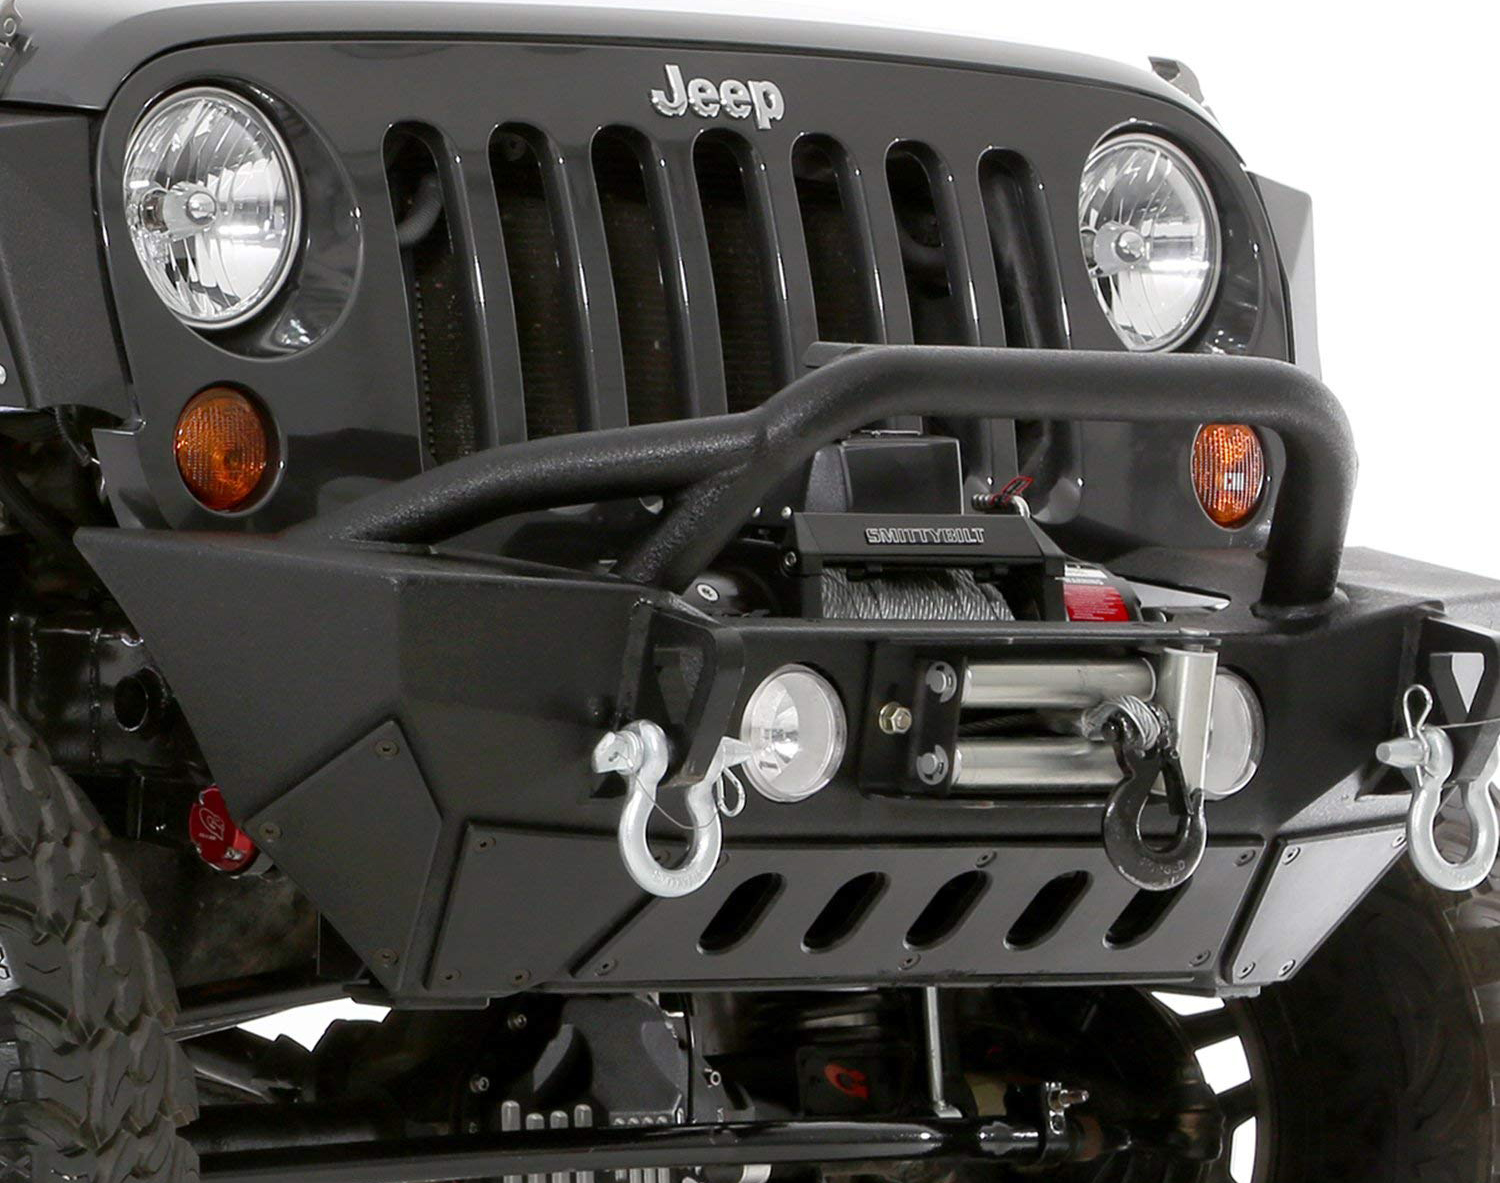 3 Features to Consider Before You Buy an Electric Winch